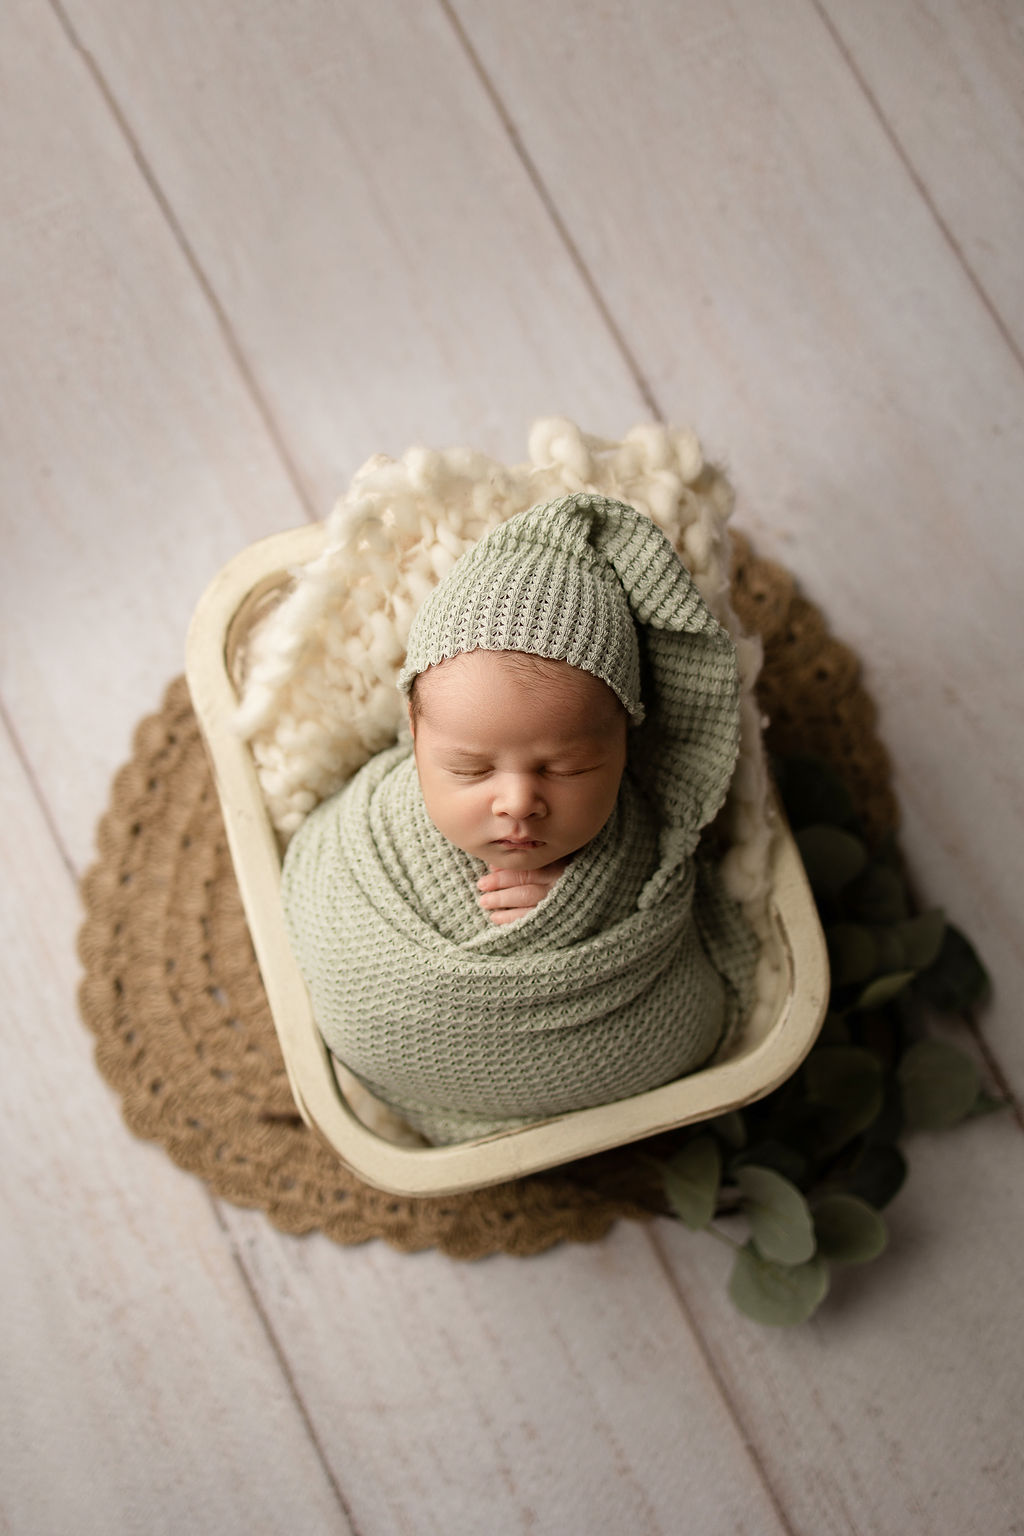 A newborn baby posed in a wooden basket sleeps in a green swaddle and night cap